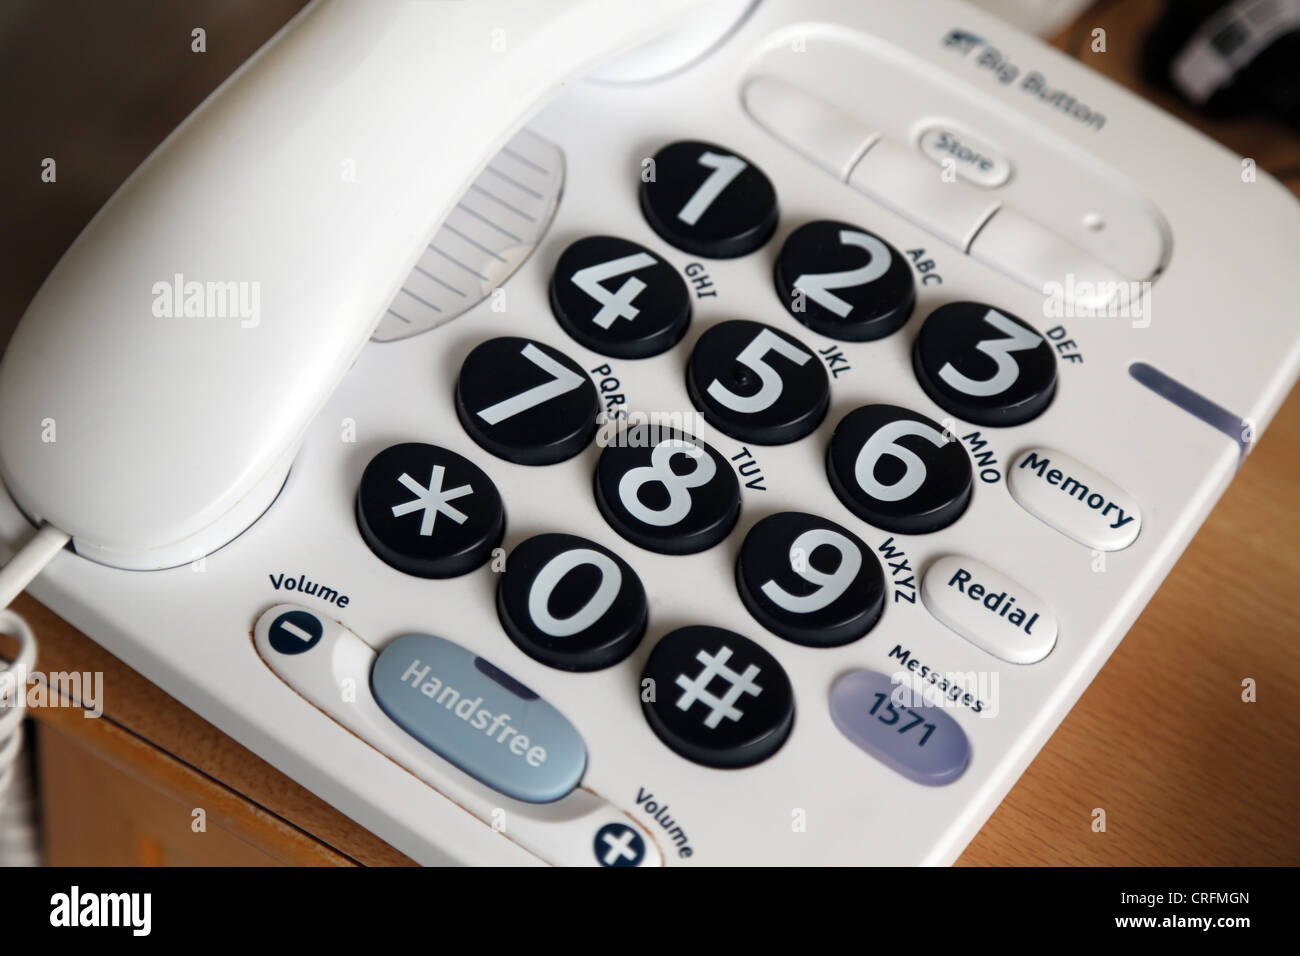 Telephone With Big Buttons Stock Photo